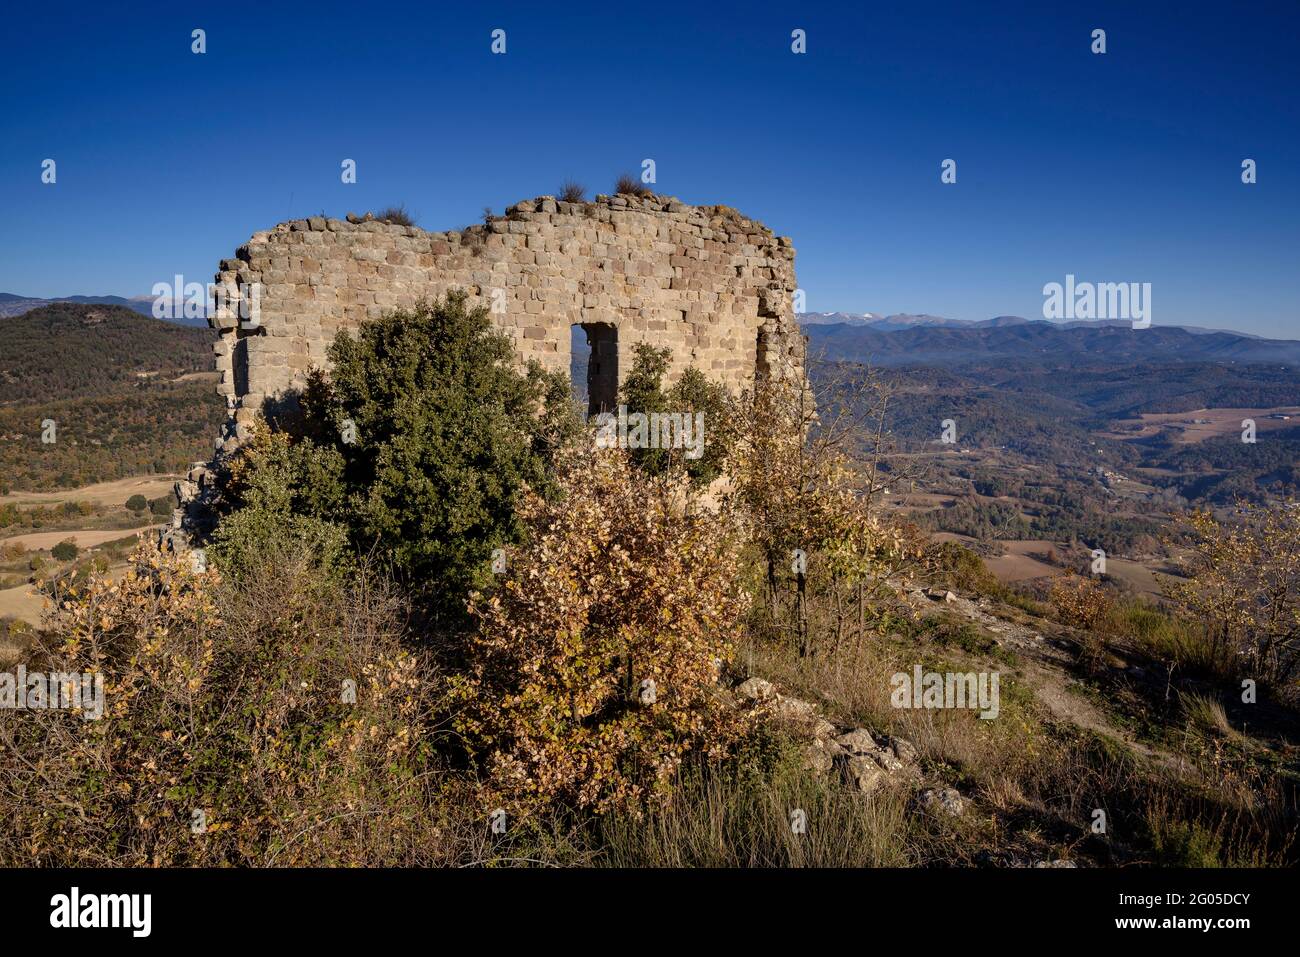 Views from the hill of the Lluçà castle with the castle ruins in the foreground (Osona, Barcelona, Catalonia, Spain) Stock Photo